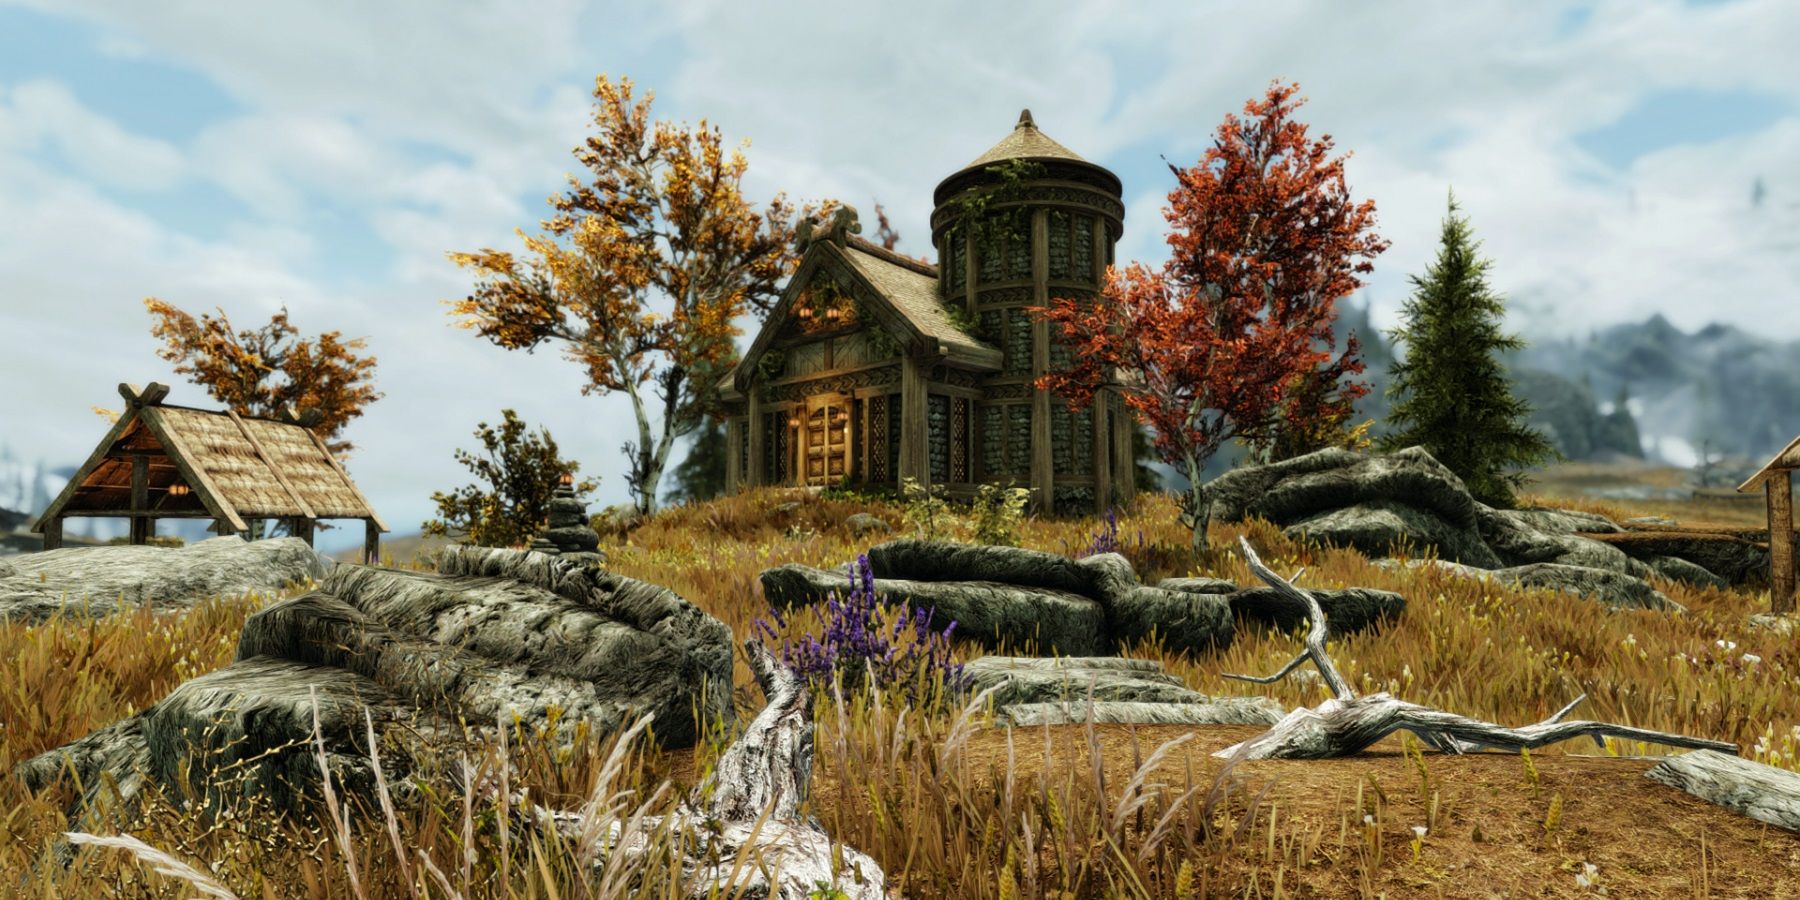 Screenshot from Skyrim showing the Tundra Homestead house in Whiterun.